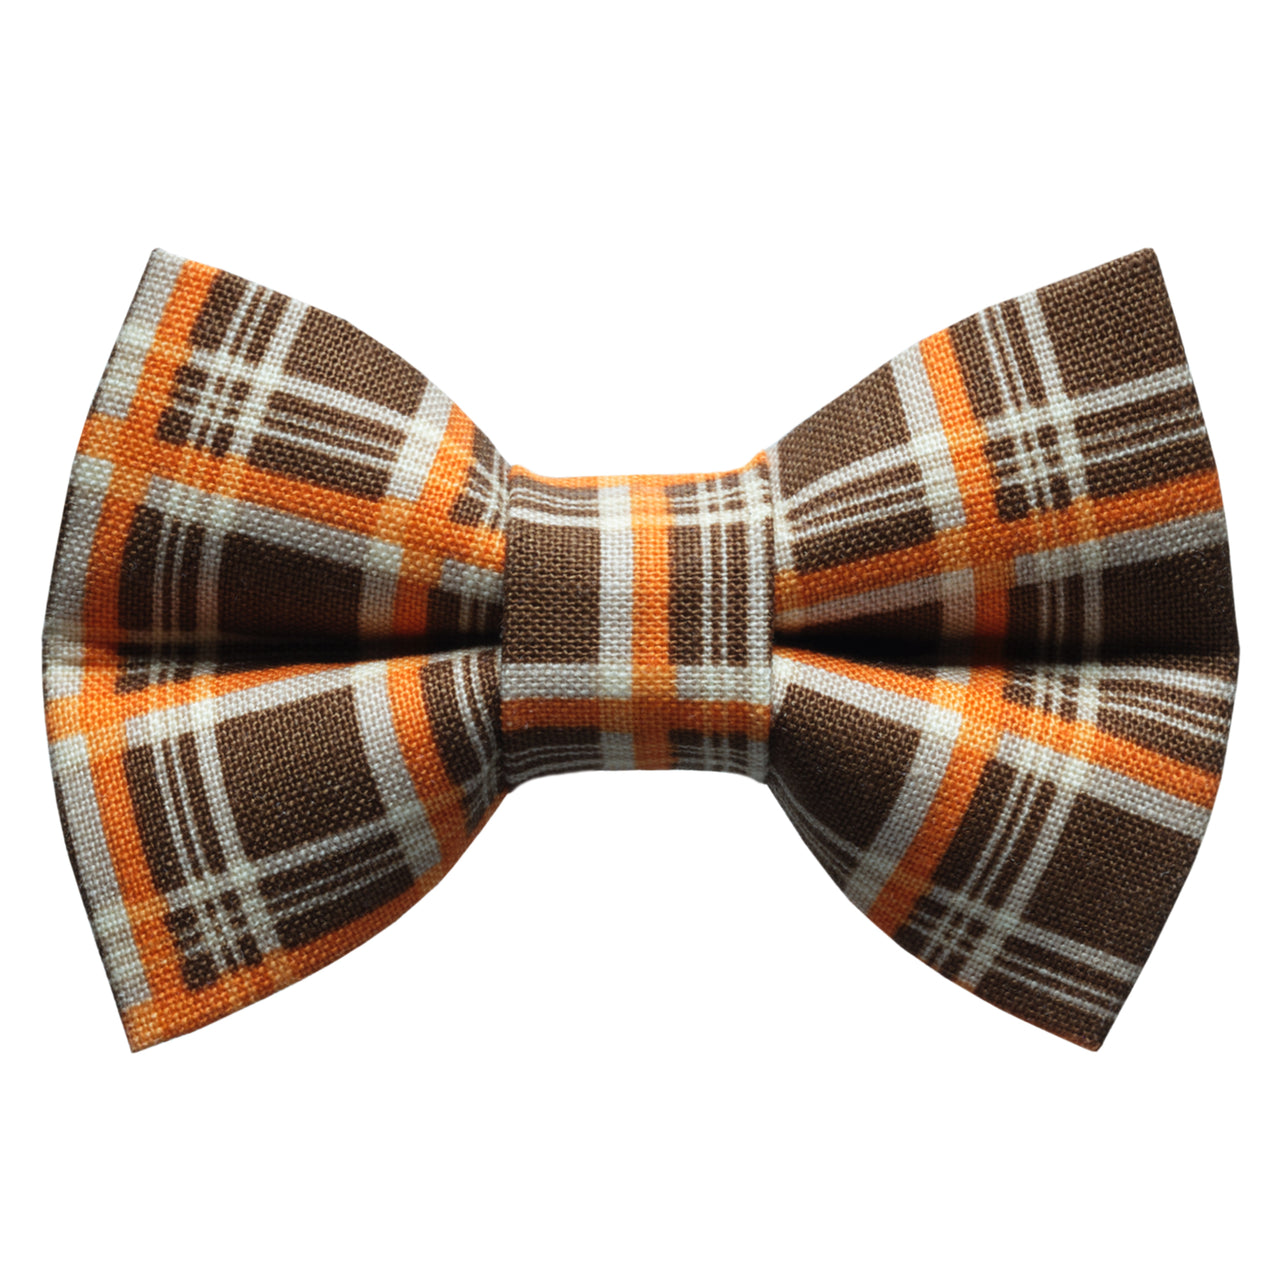 The Down to Earth - Cat / Dog Bow Tie